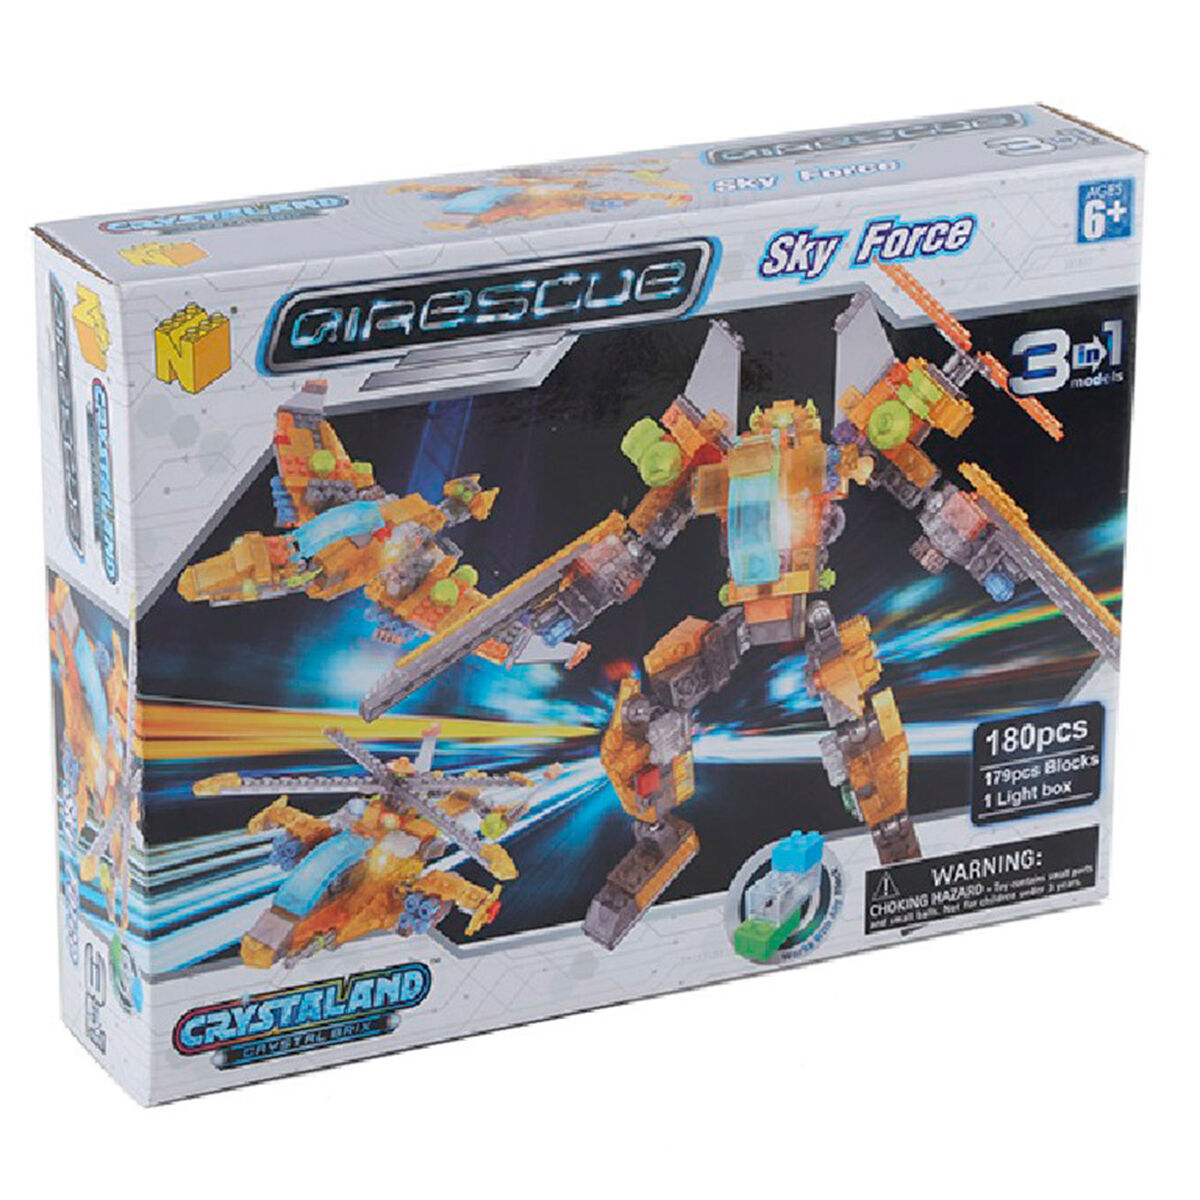 Set Bloques Crystaland Sky Force